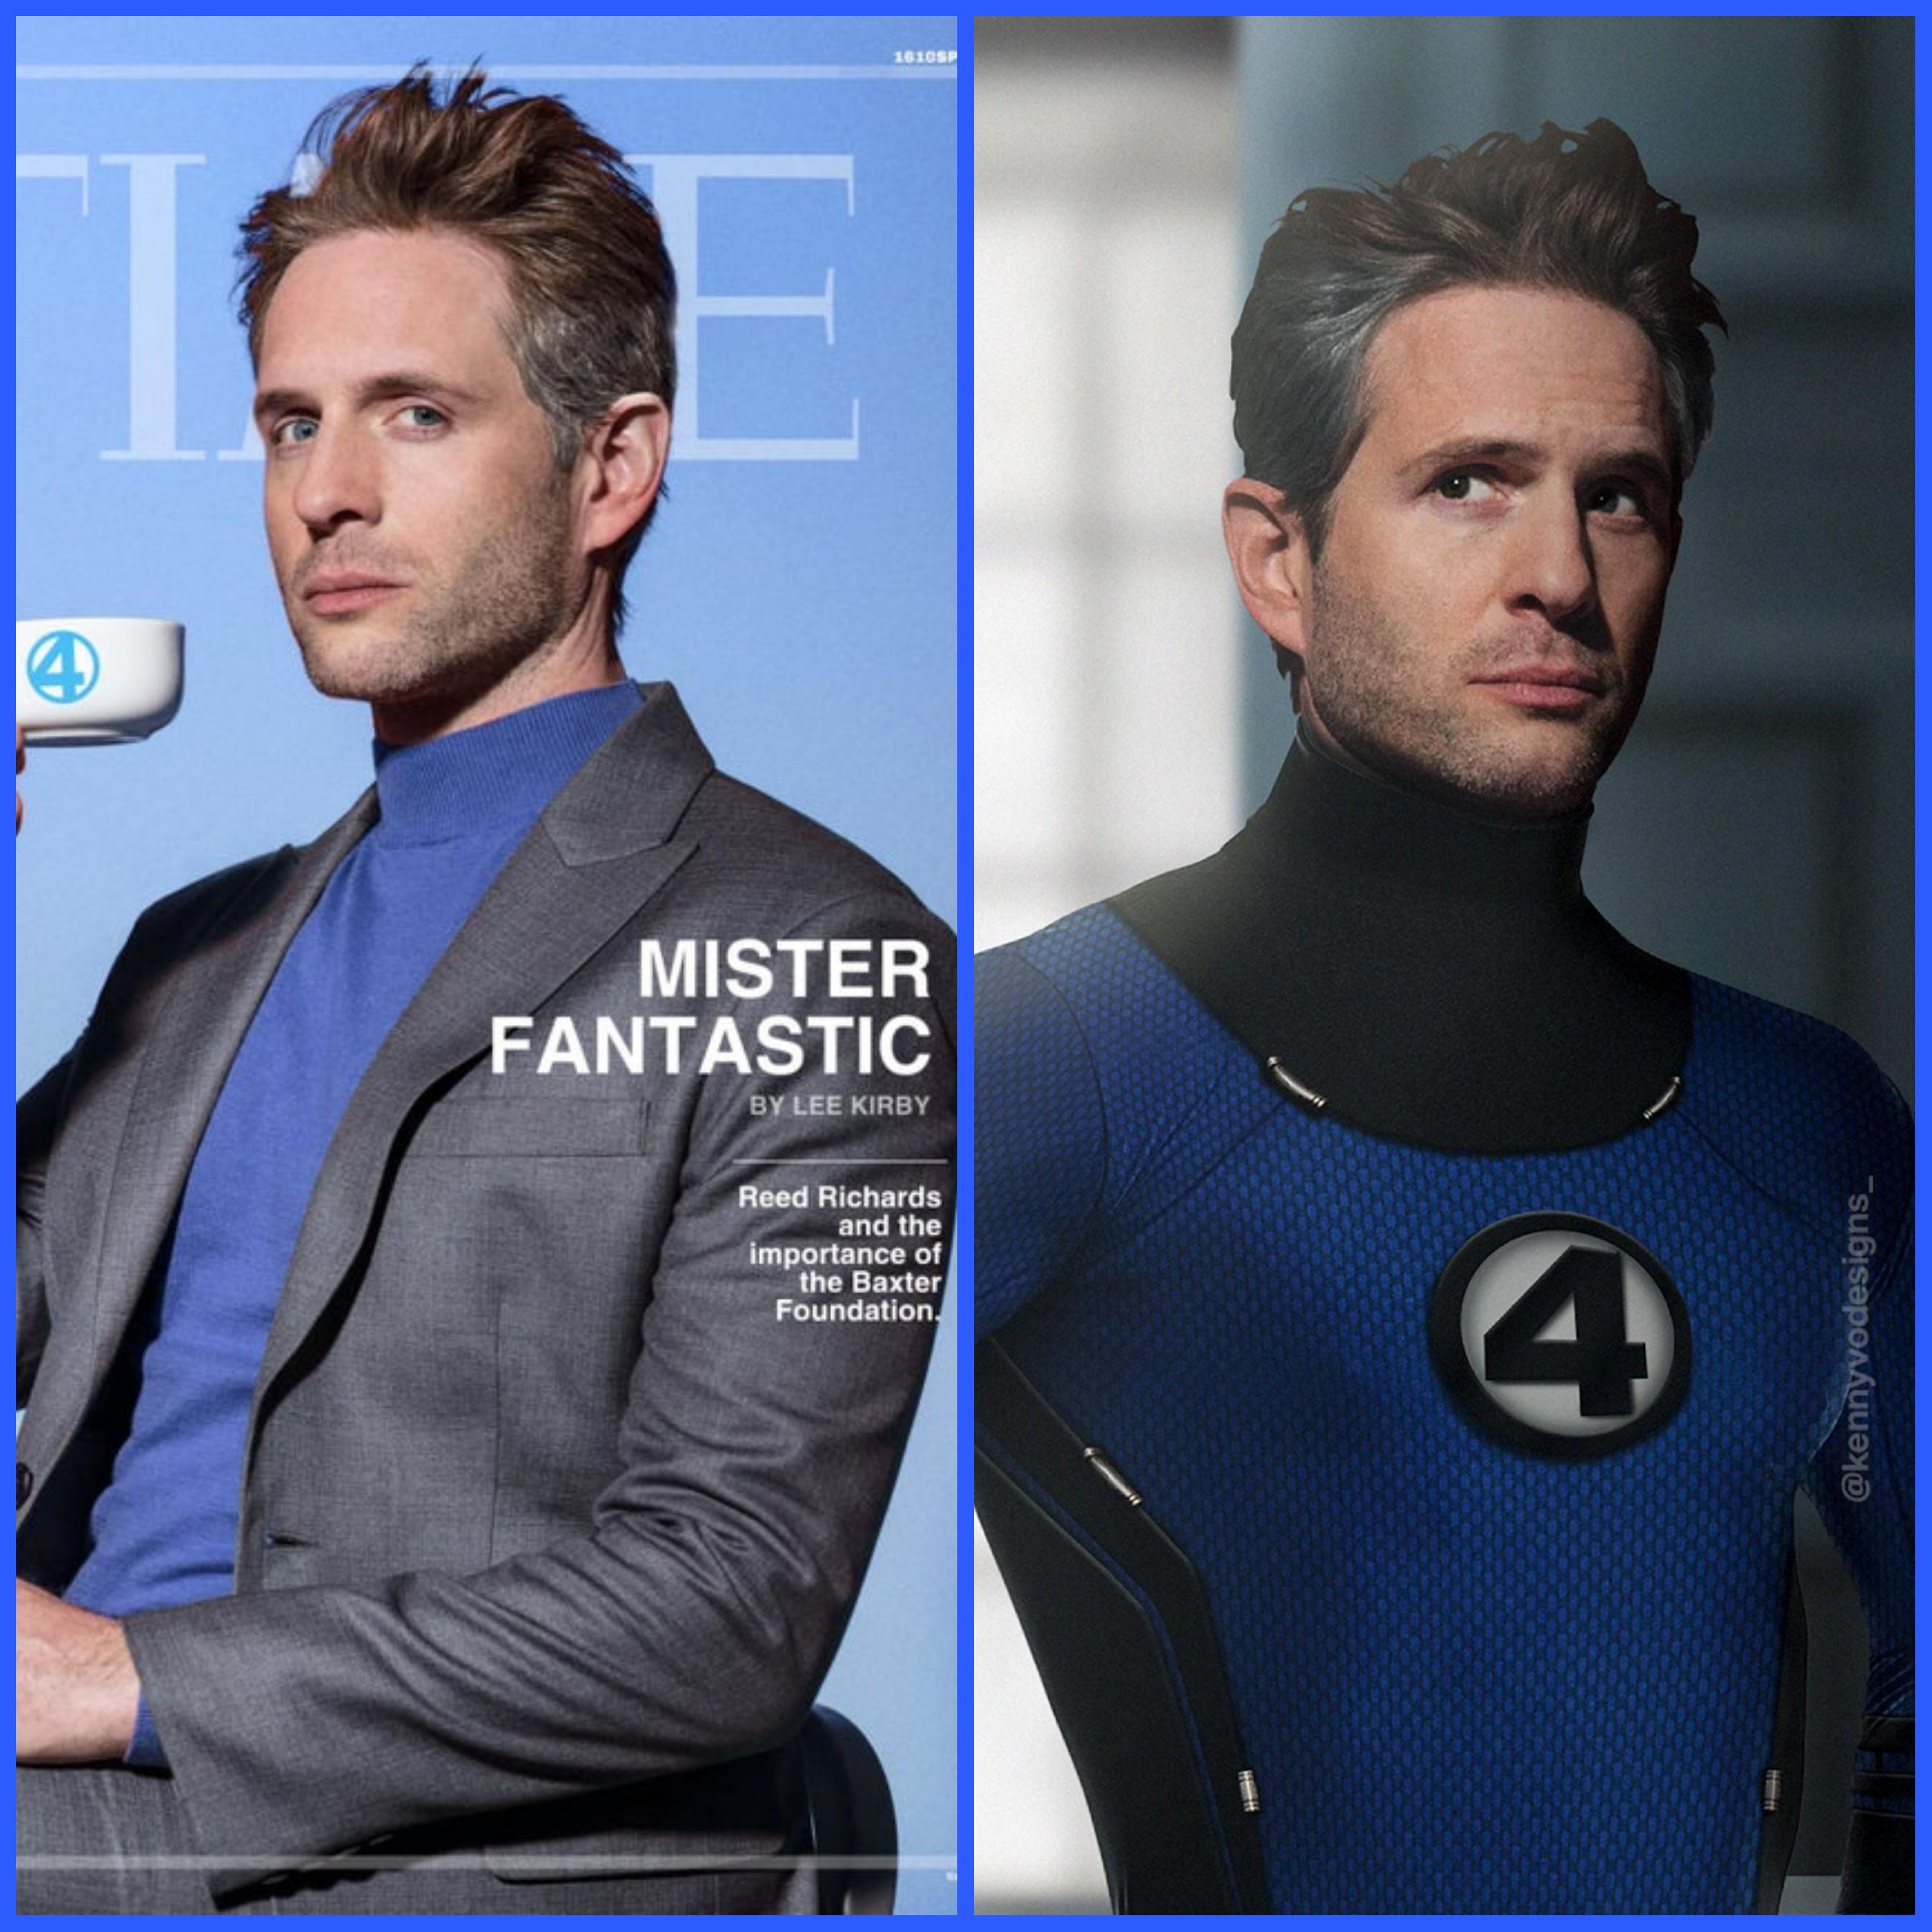 glenn-howerton-as-reed-richards-this-is-just-gold-v0-i8ma00dykel91.jpg